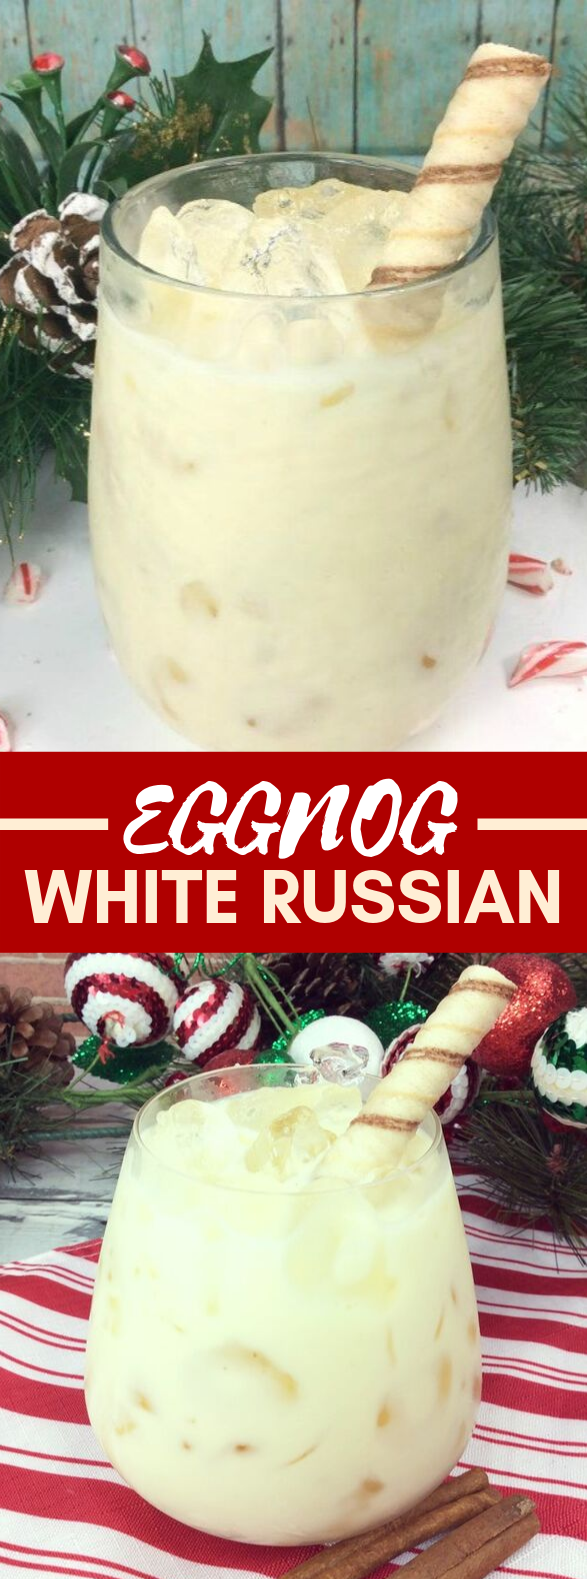 WHITE RUSSIAN EGGNOG #drinks #holidayparty